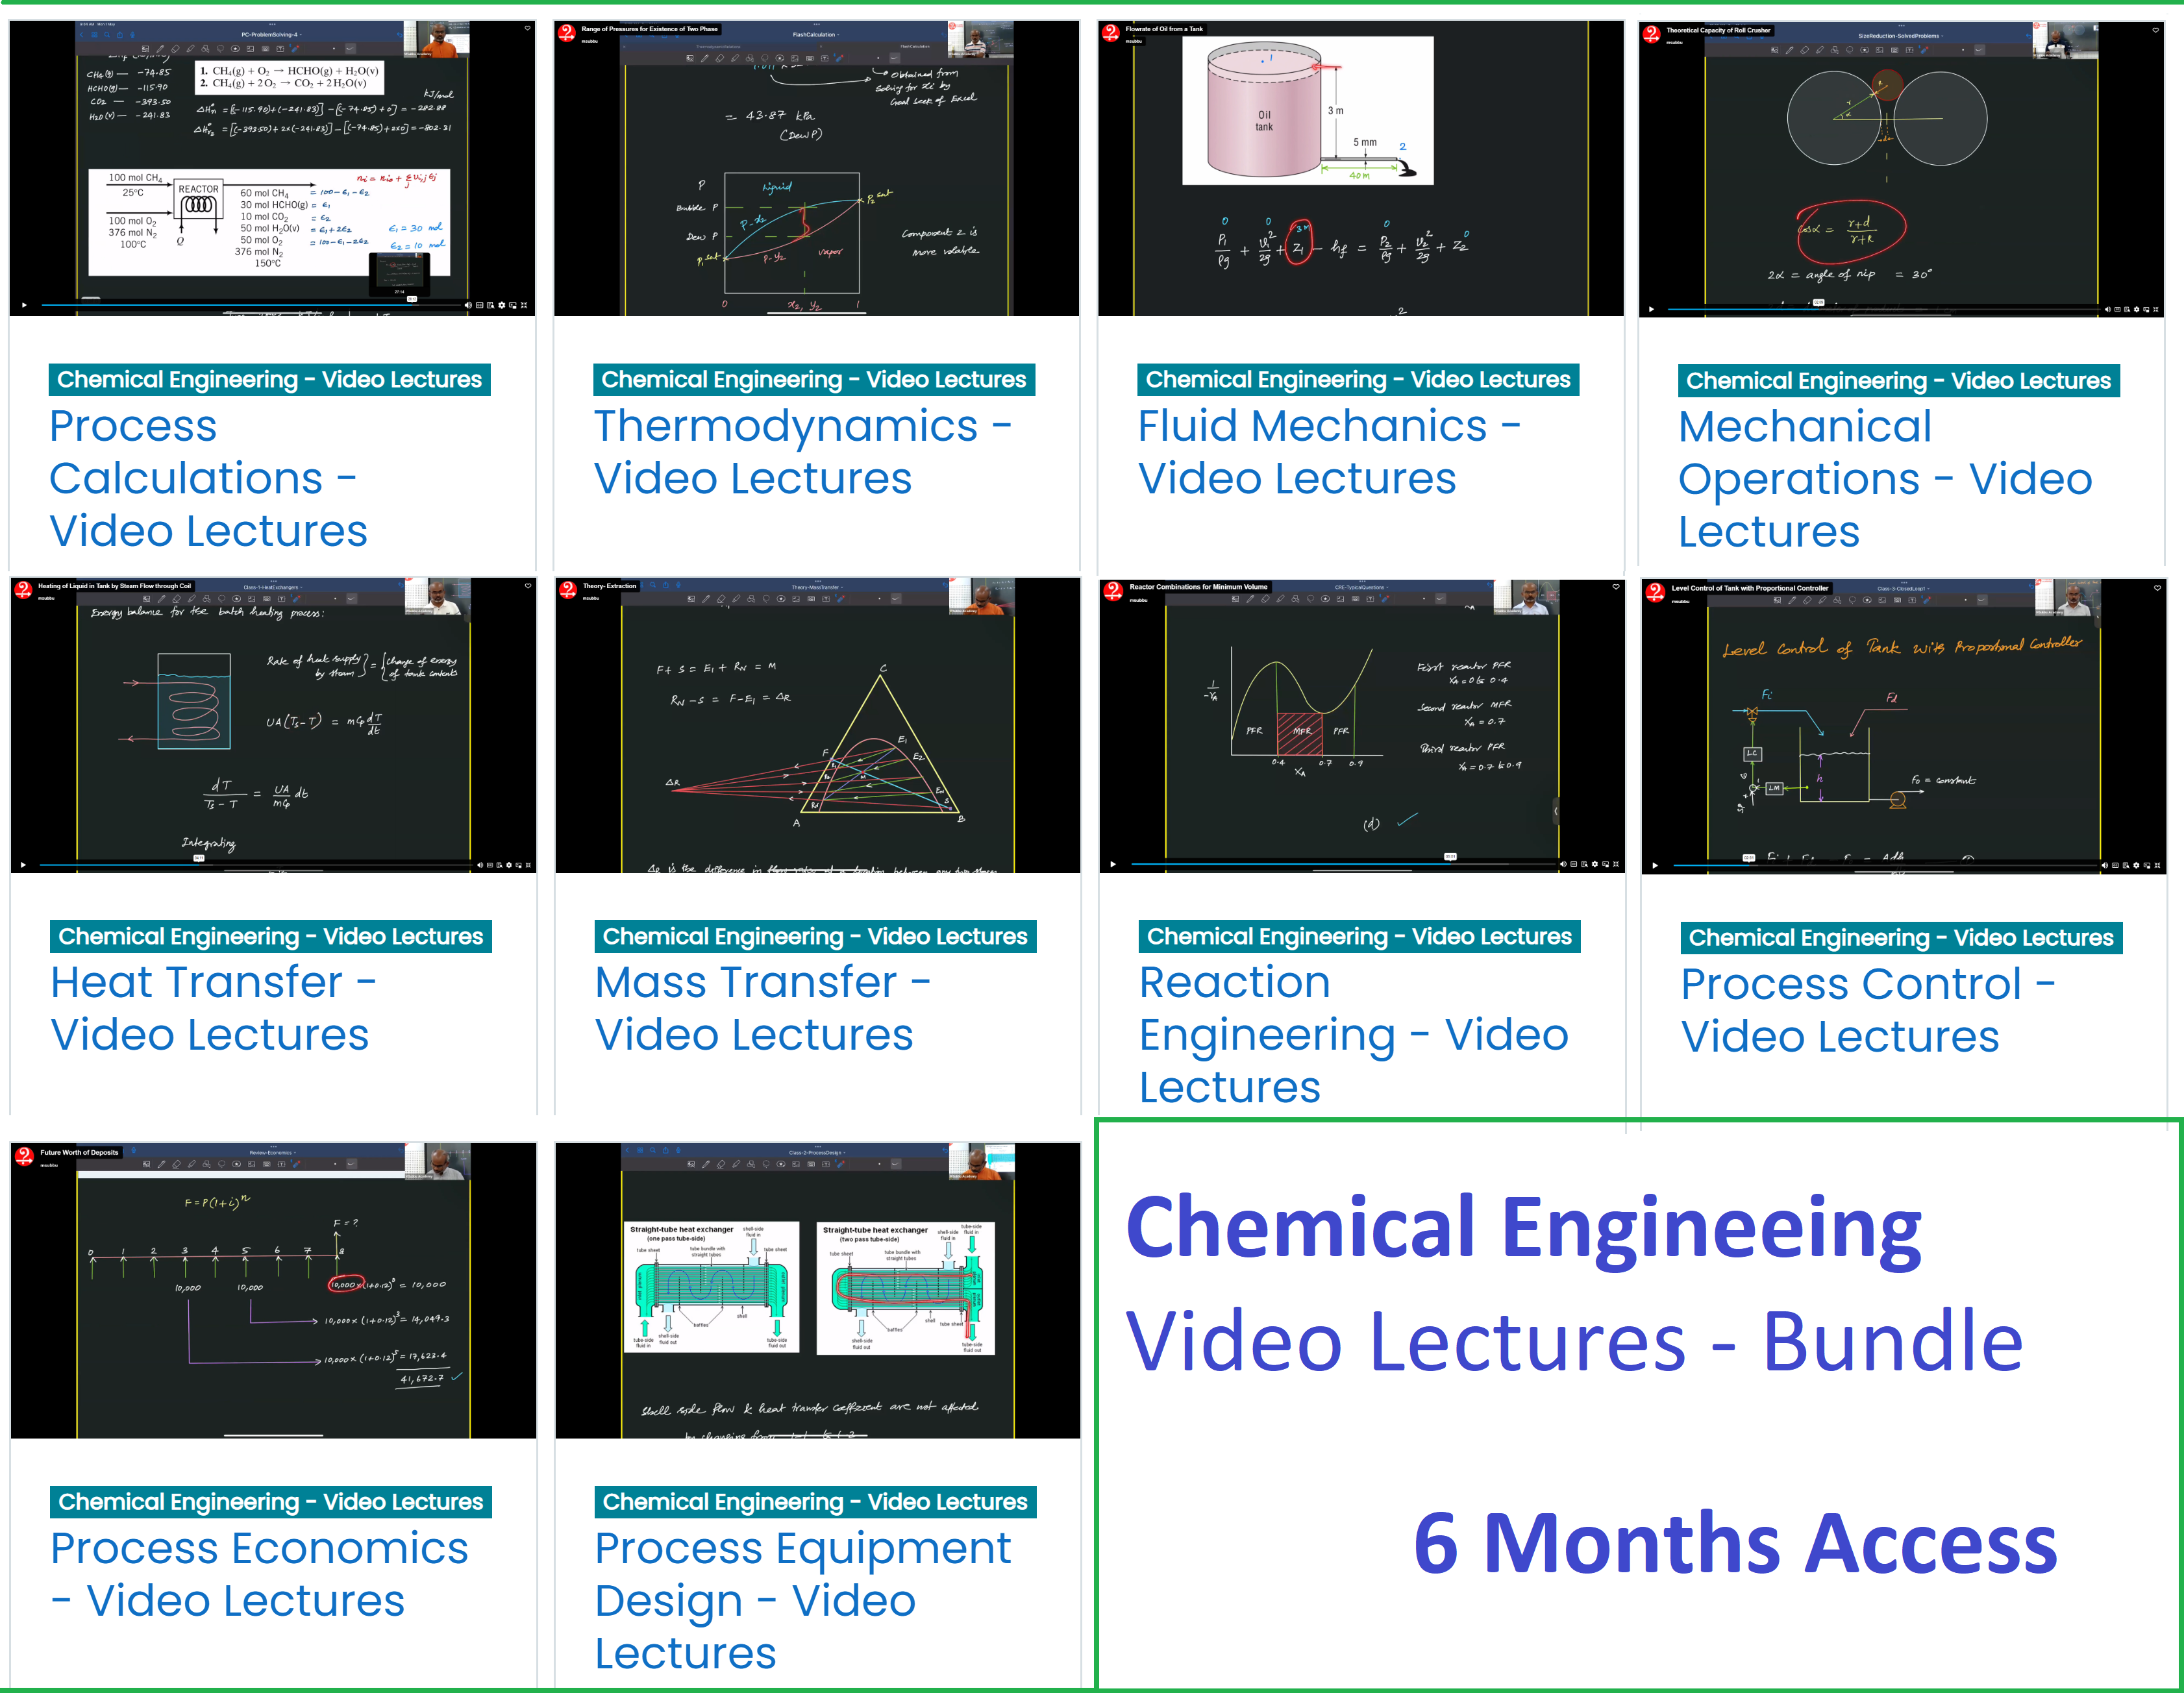 Chemical Engineering Video Lectures Bundle - 6 Months Access